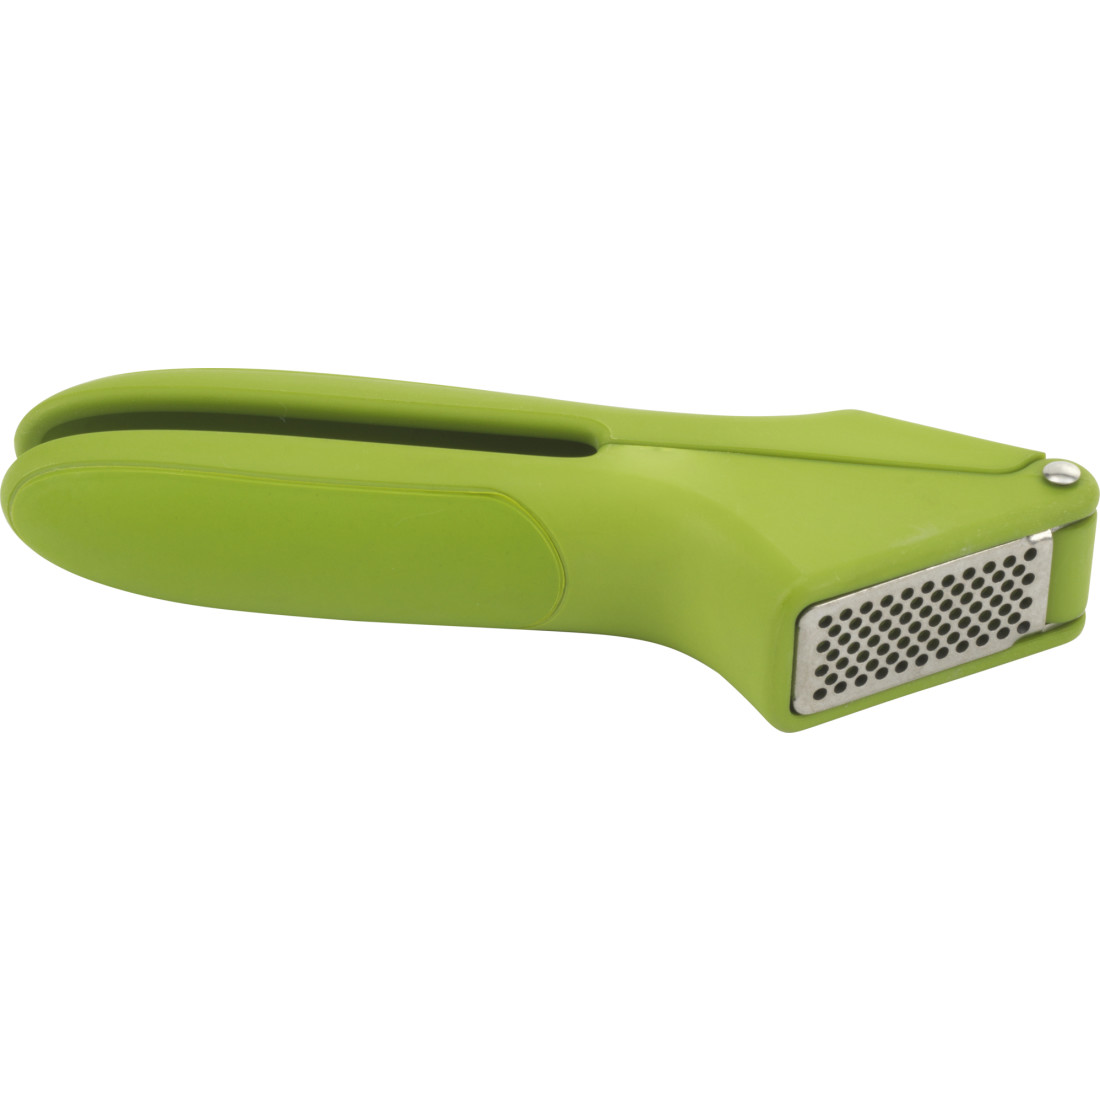 Garlic-A-Peel Garlic Press, Crusher, Cutter, Mincer, and Storage Container  — The Grateful Gourmet